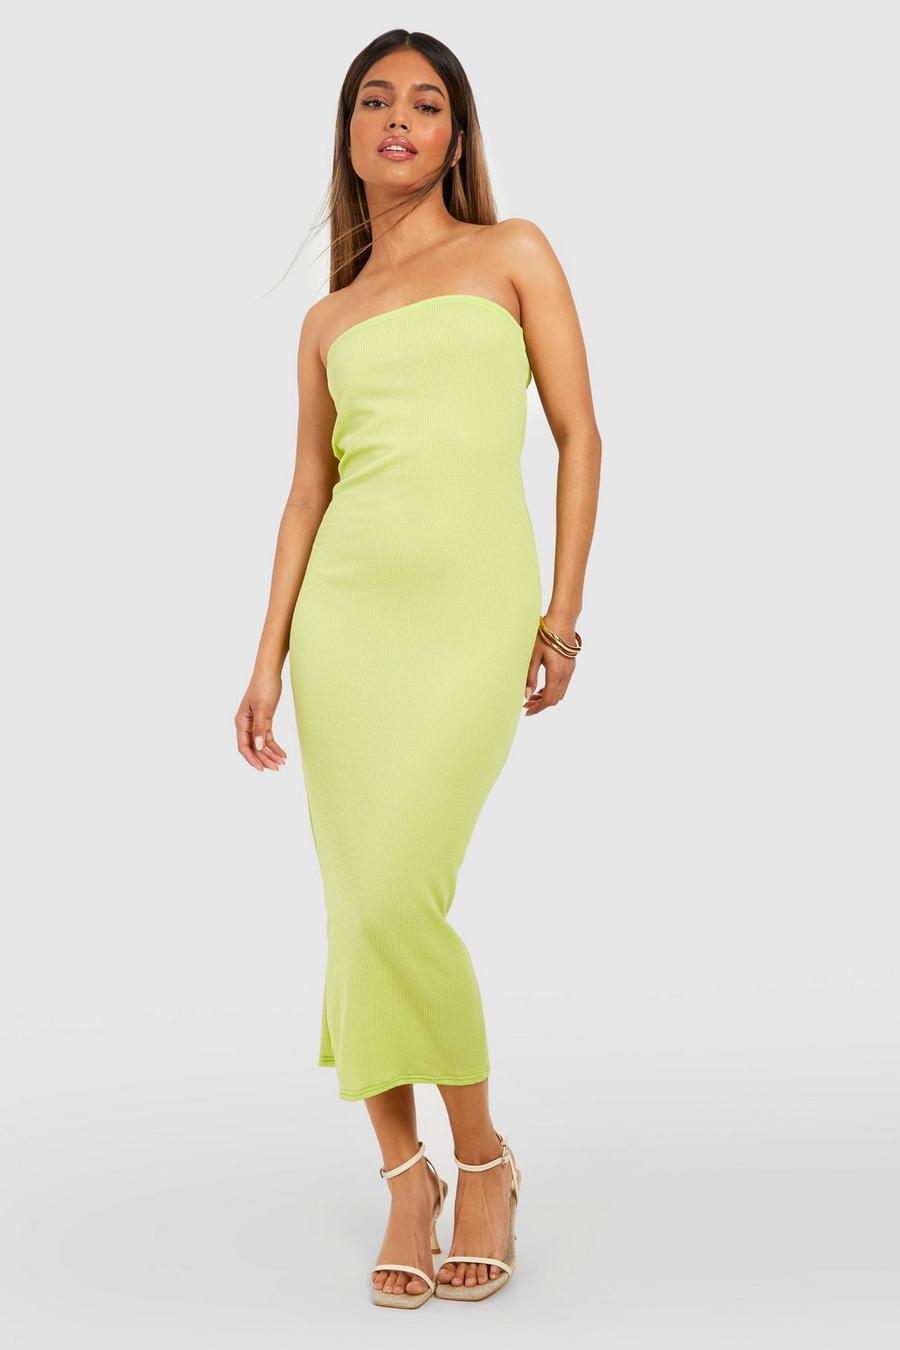 Lime green Bandeau Low Back Textured Midaxi Dress